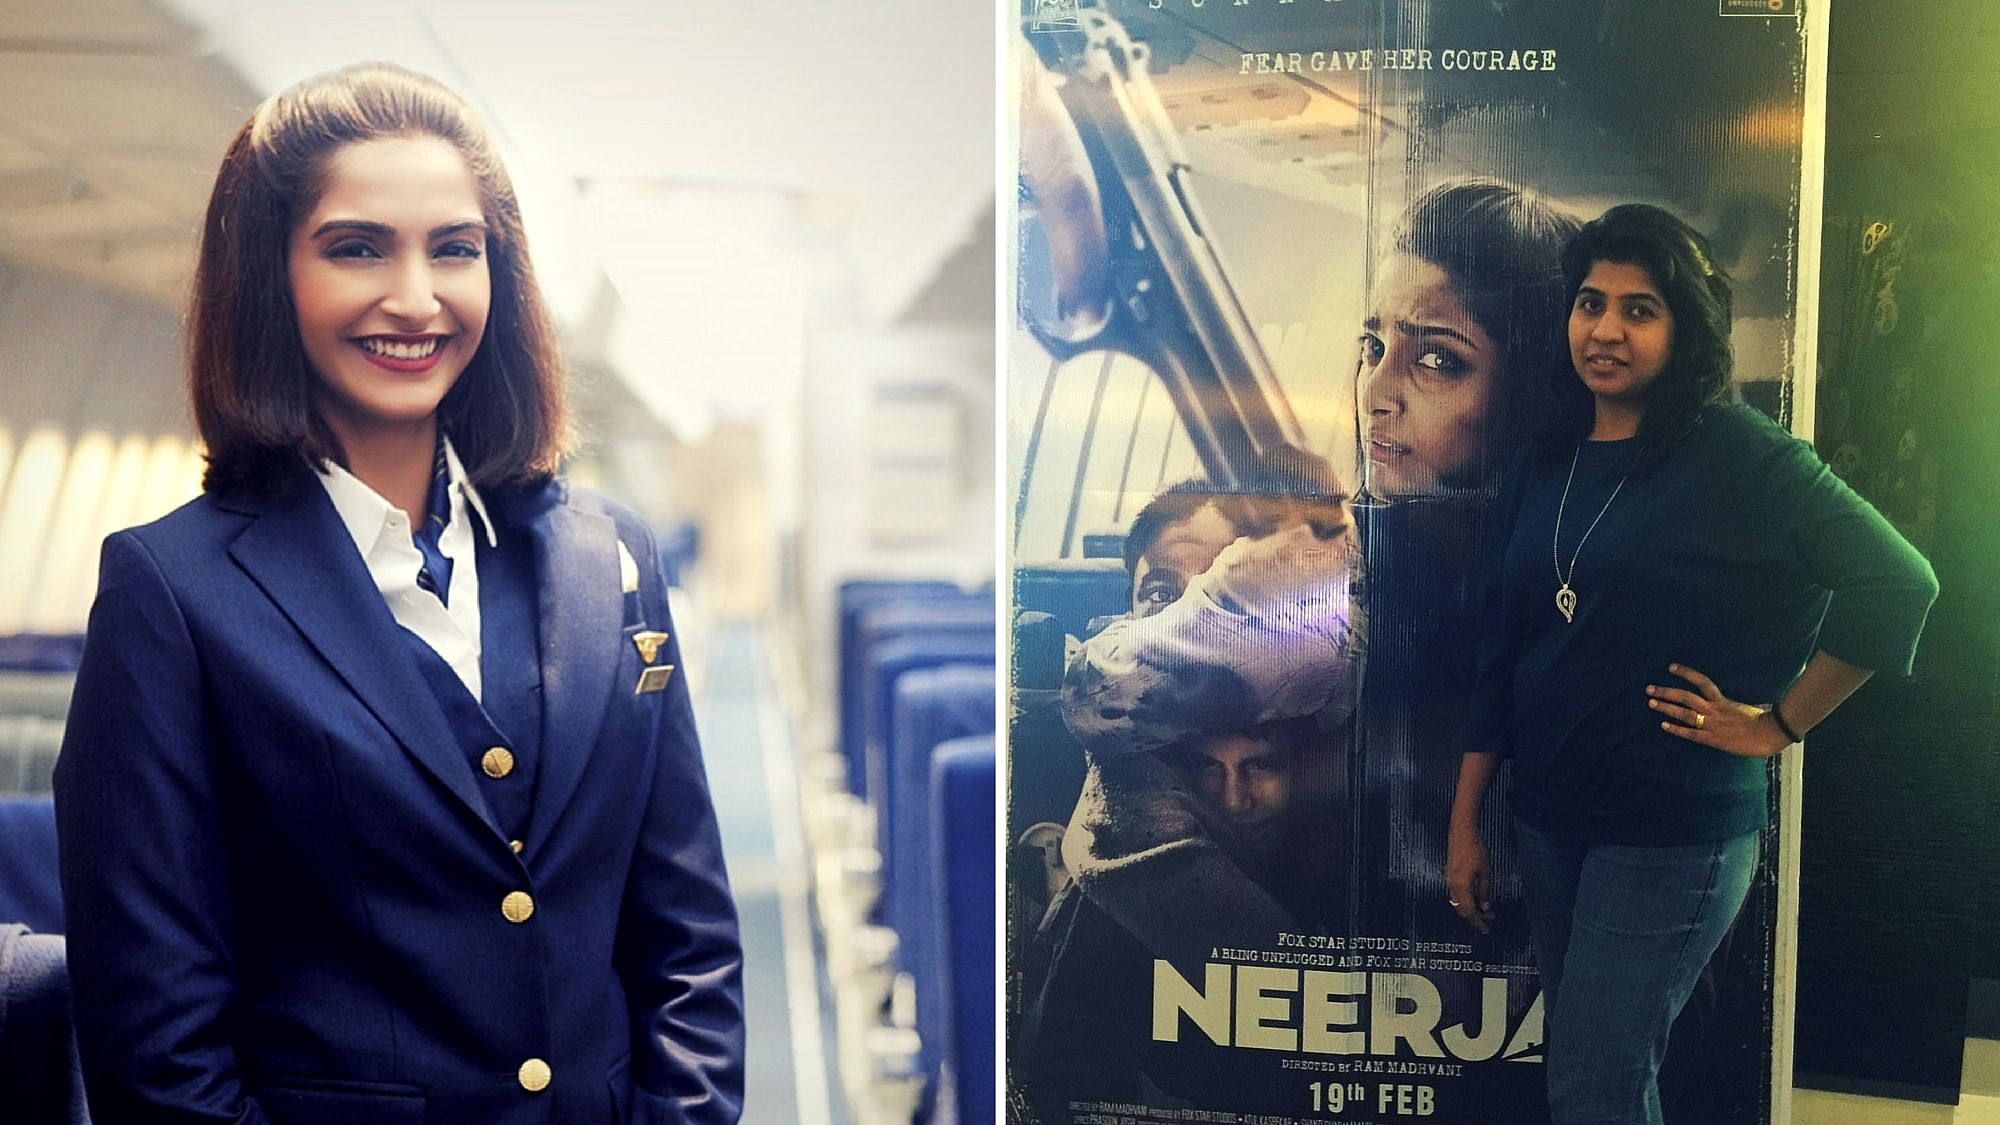 Here’s why I think Neerja is banned in my country. (Photo Courtesy: Movie poster; Desiree Francis [R])